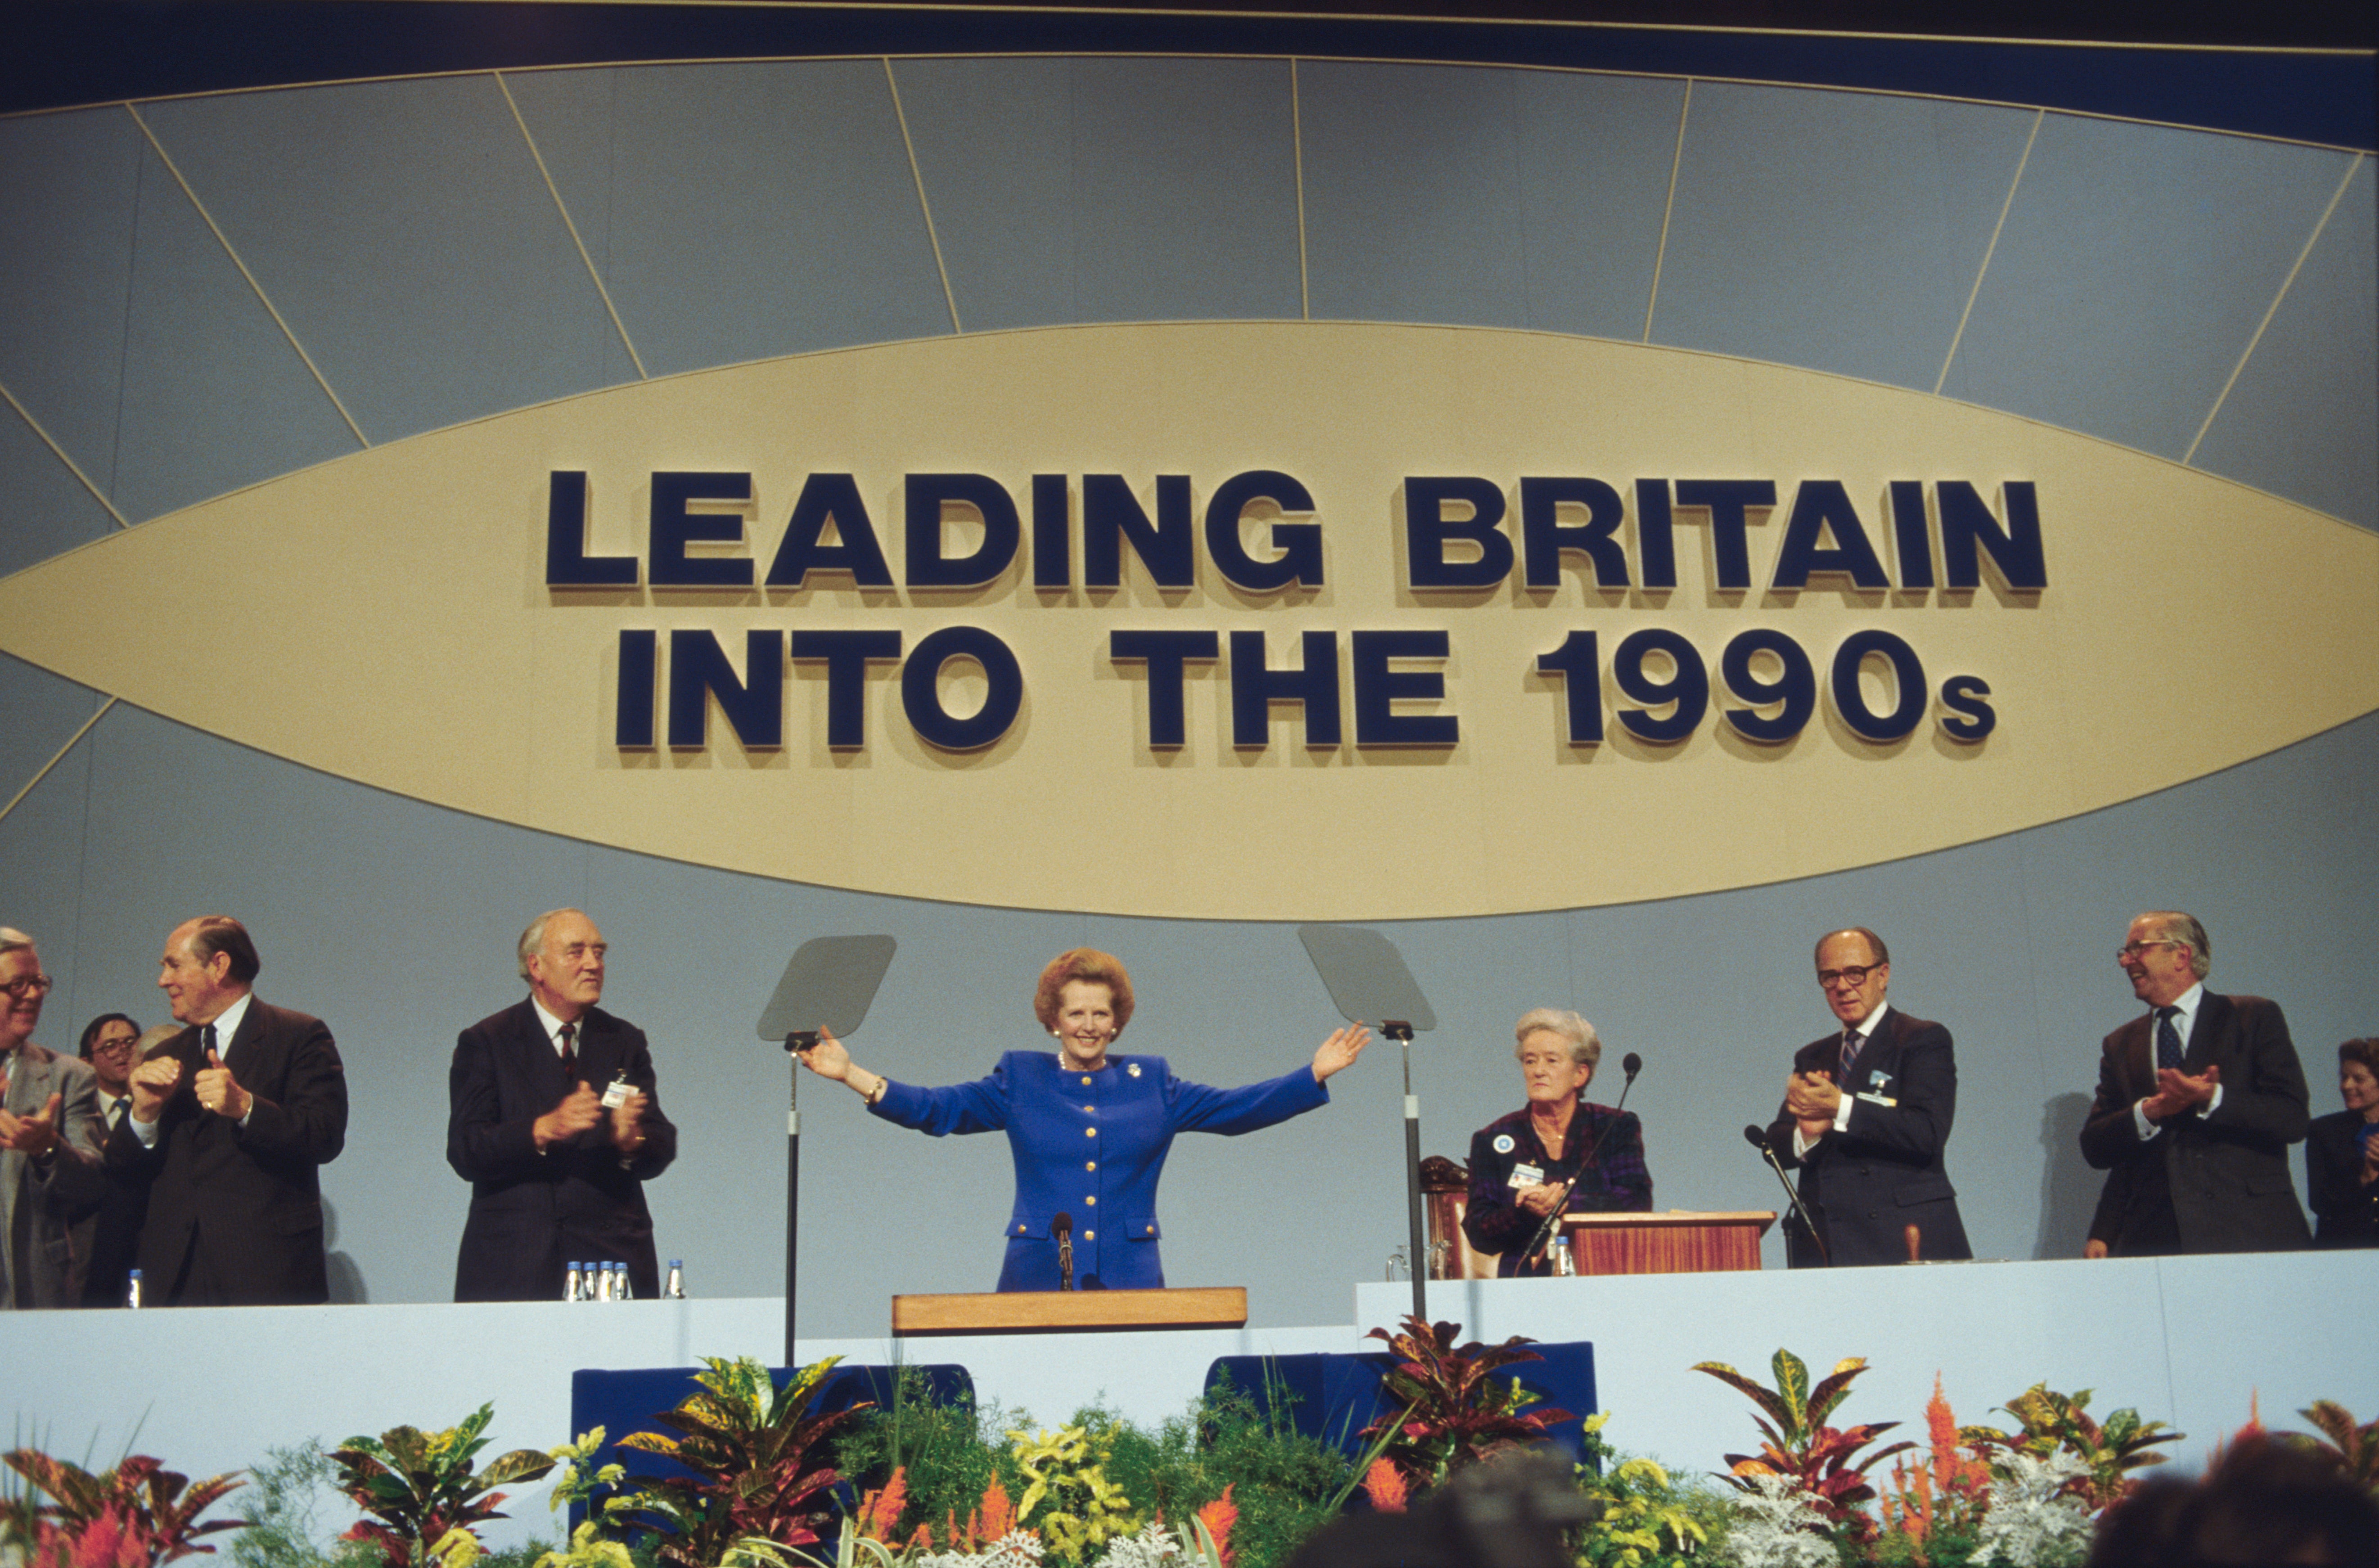 The Thatcher era was something of a golden one for the Tories